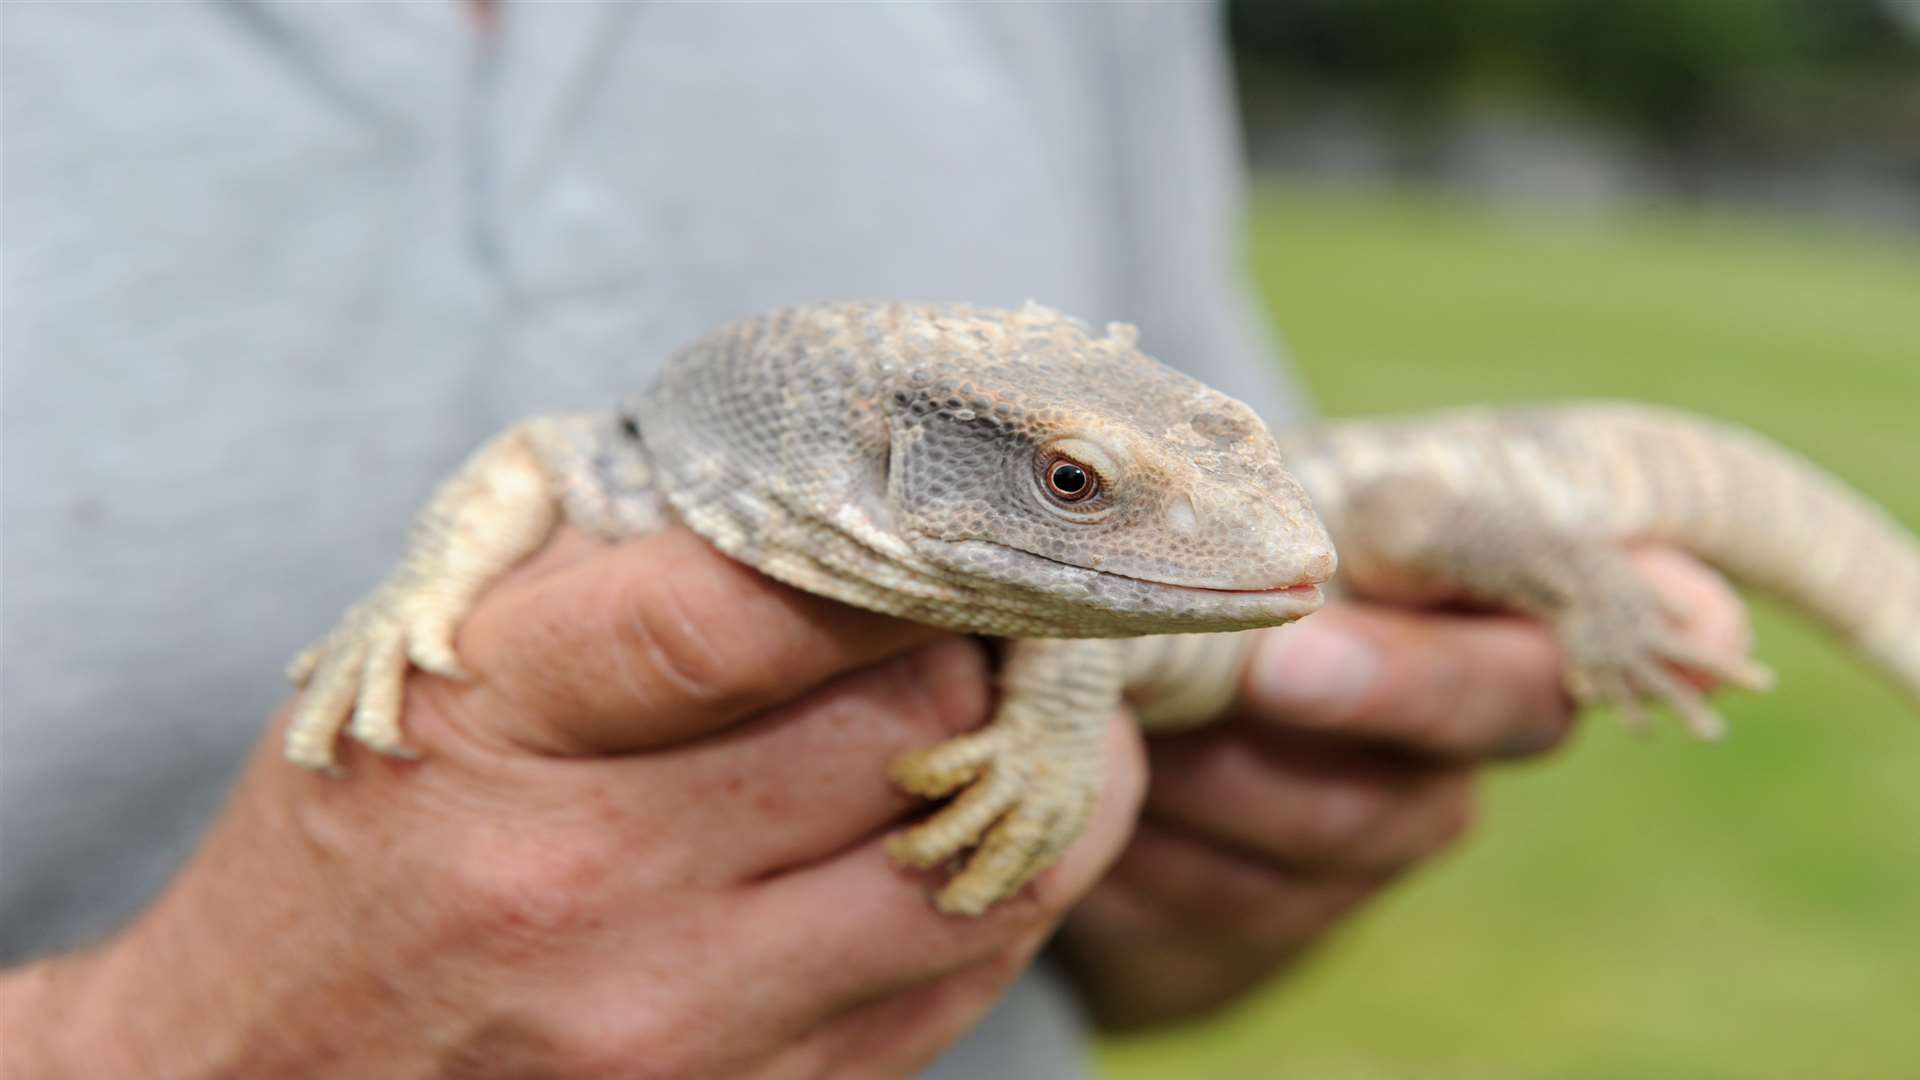 A new national reptile welfare centre will be the first of its kind in the UK